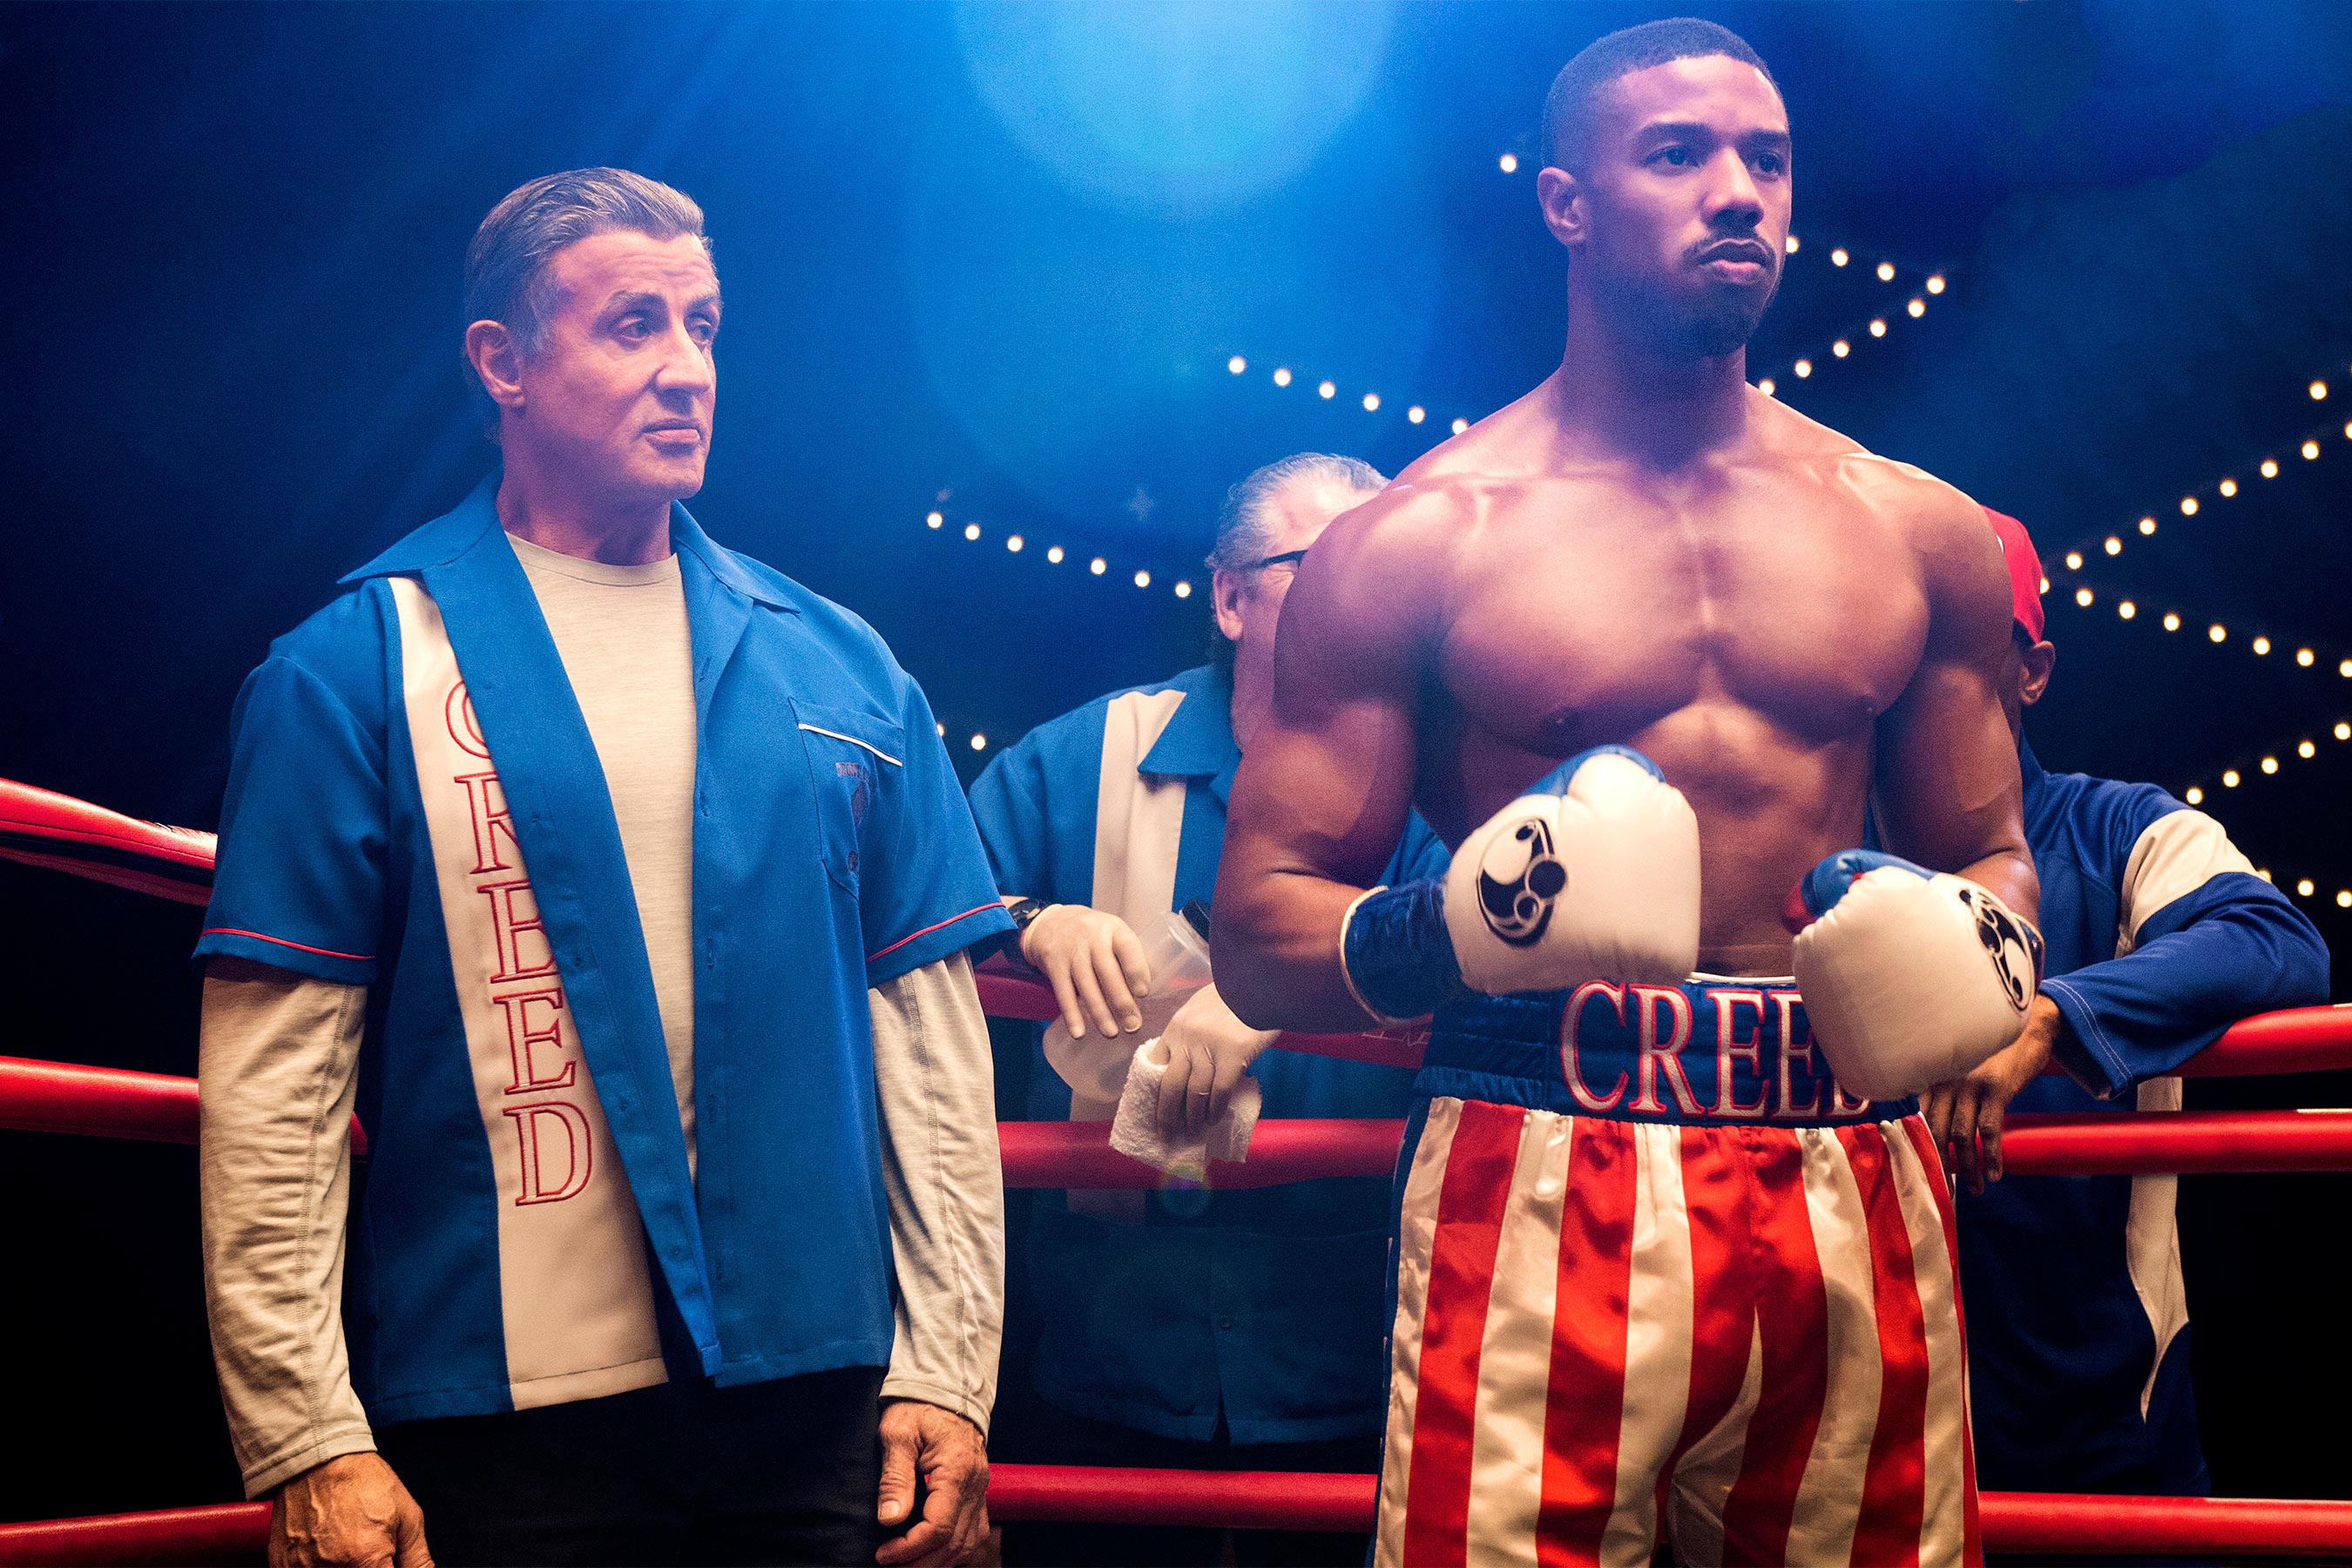 Combat Sports: Creed 2 Movie, The former Heavyweight Champion, Challenging Rocky Balboa. 2700x1800 HD Wallpaper.